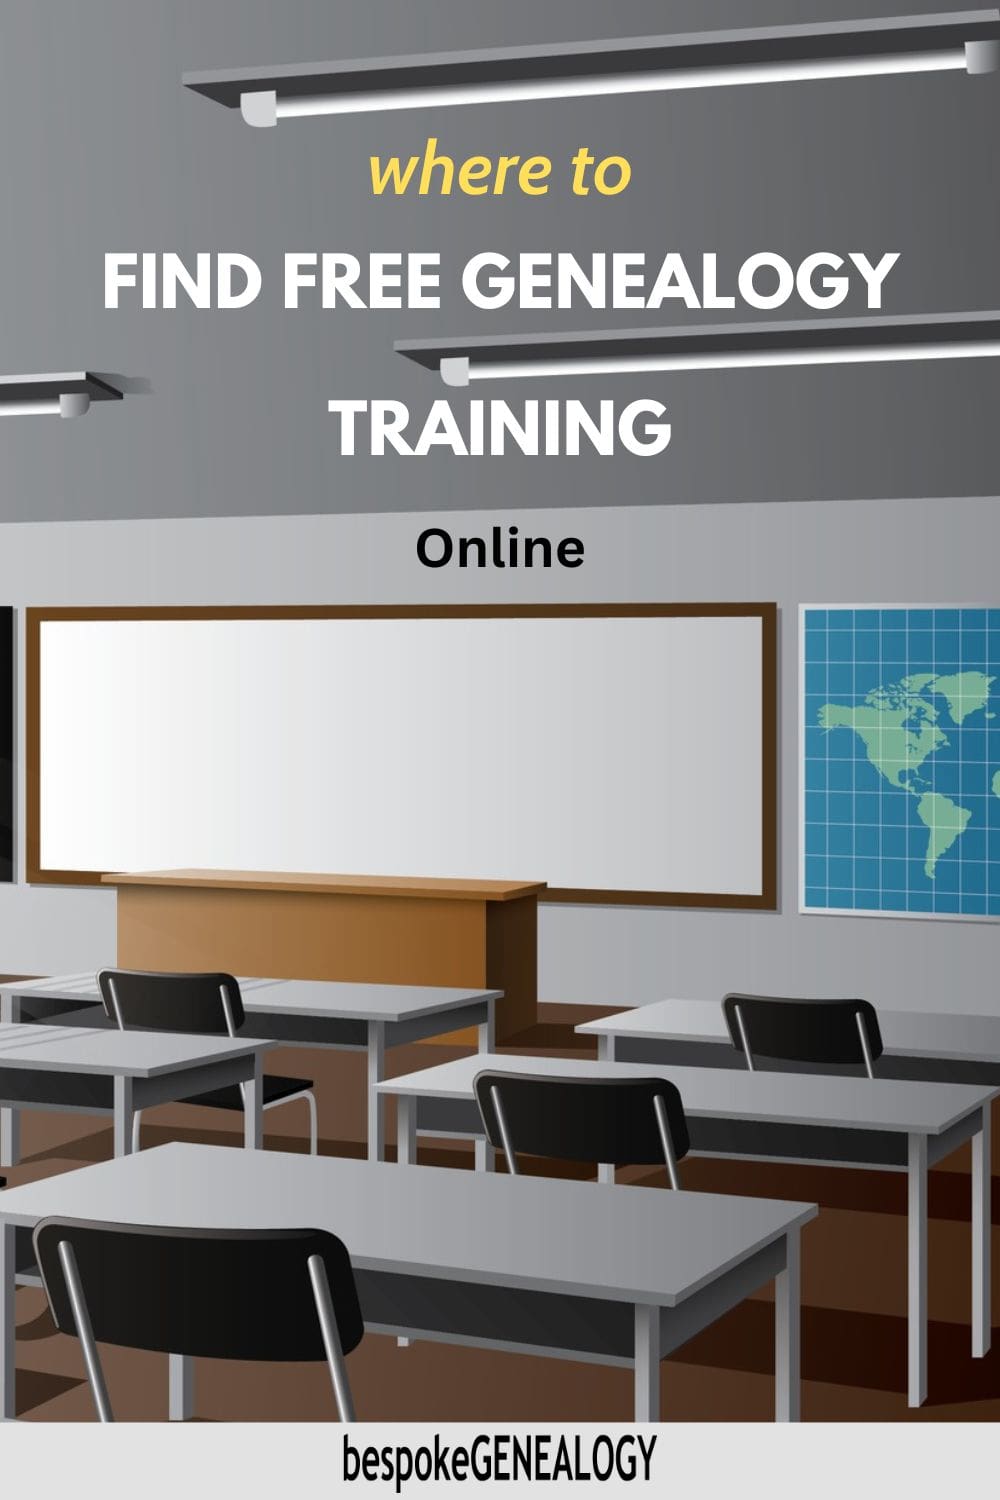 Pinterest pin. Where to find free genealogy training. Image of an empty classroom.